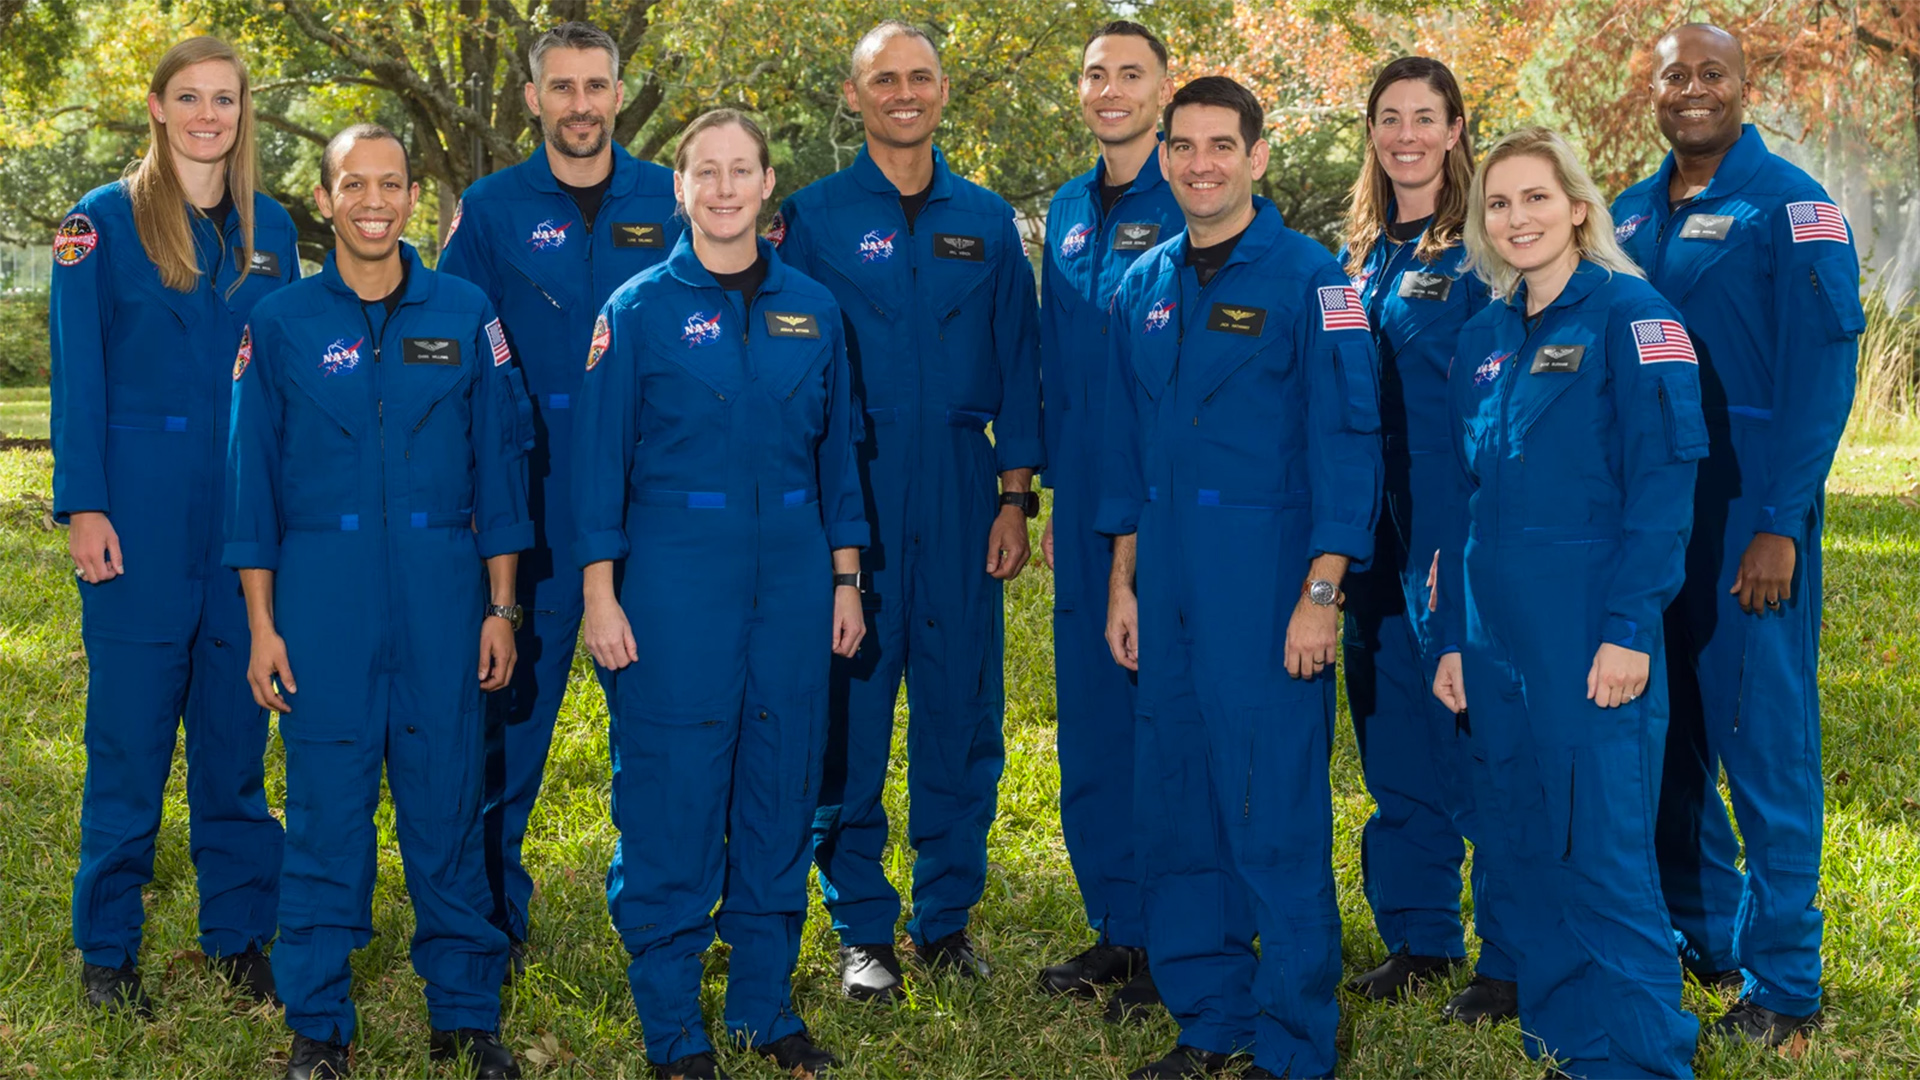 NASA introduced its new astronaut candidate class on Monday — the first such group in four years.